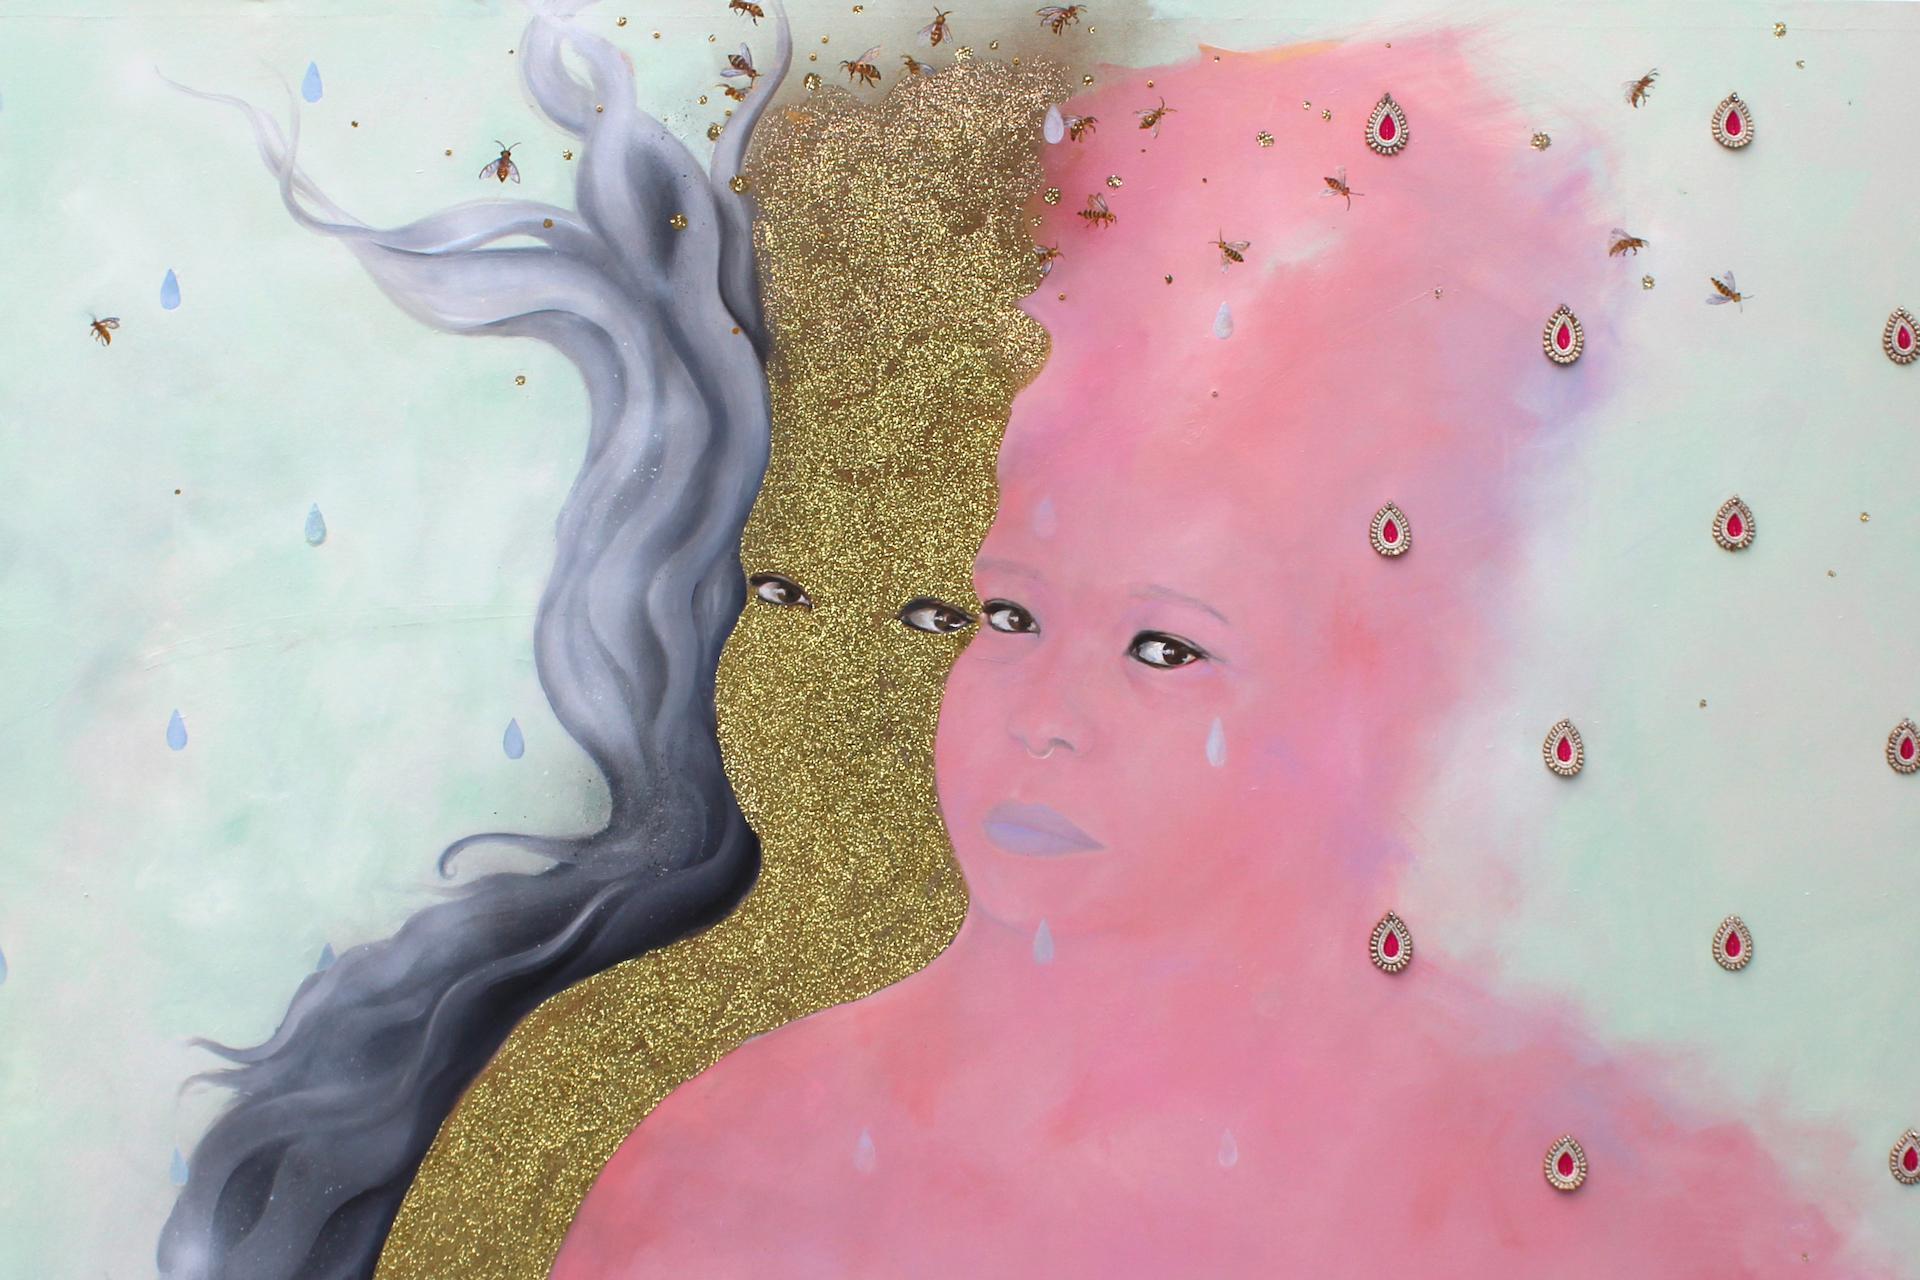 &quot;Liminal Being(s)&quot; by Saba Taj. Three figures: one of gray wisps, gold glitter, and pink haze. Painting. Multimedia.